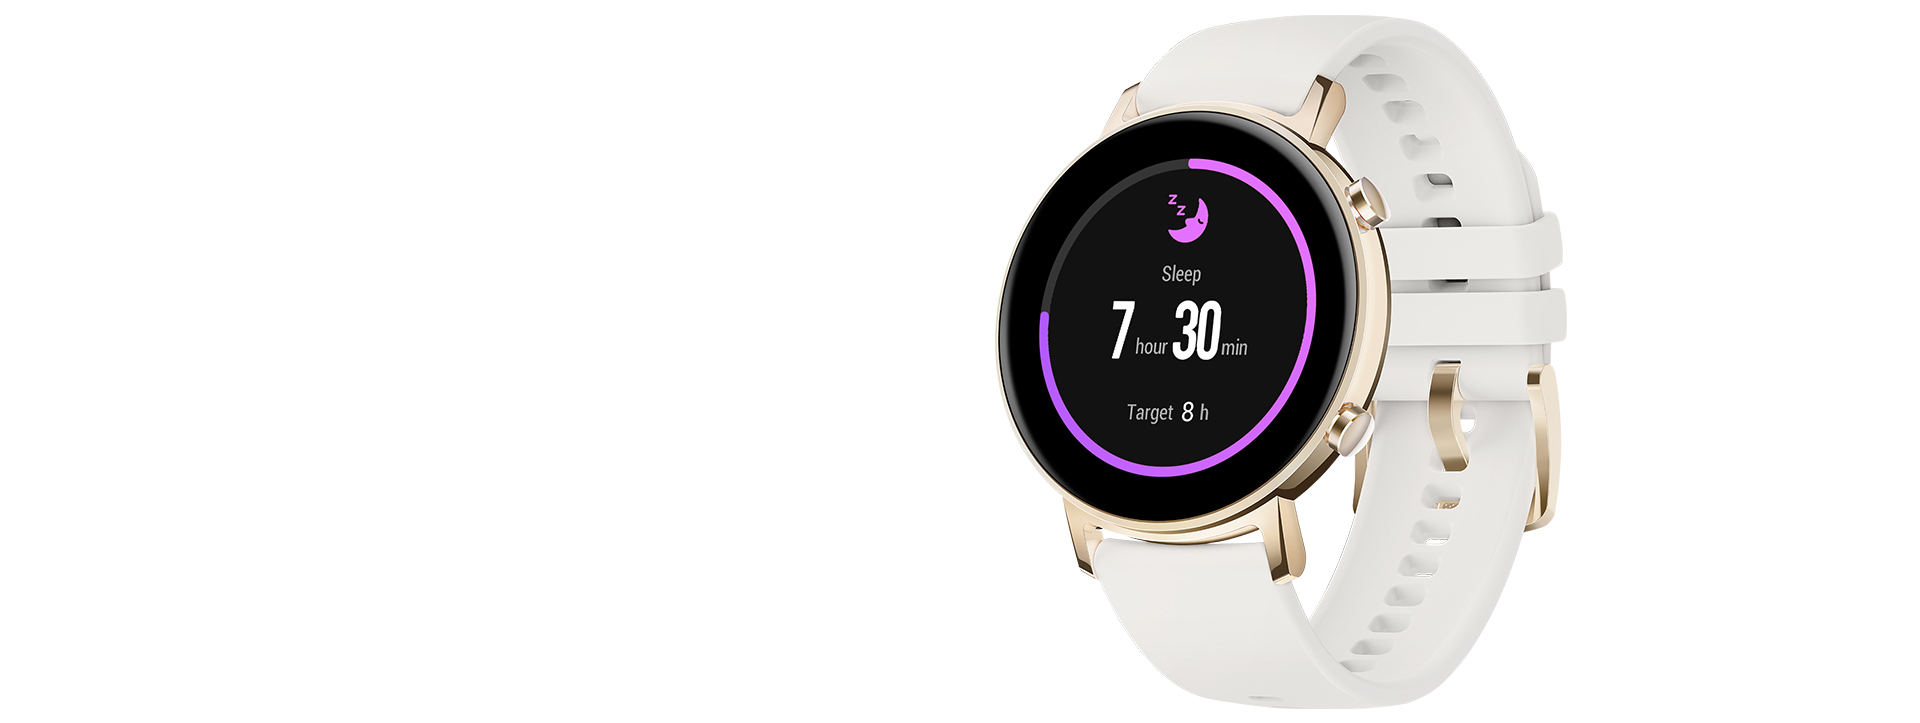 HUAWEI WATCH GT2 Activity Tracking